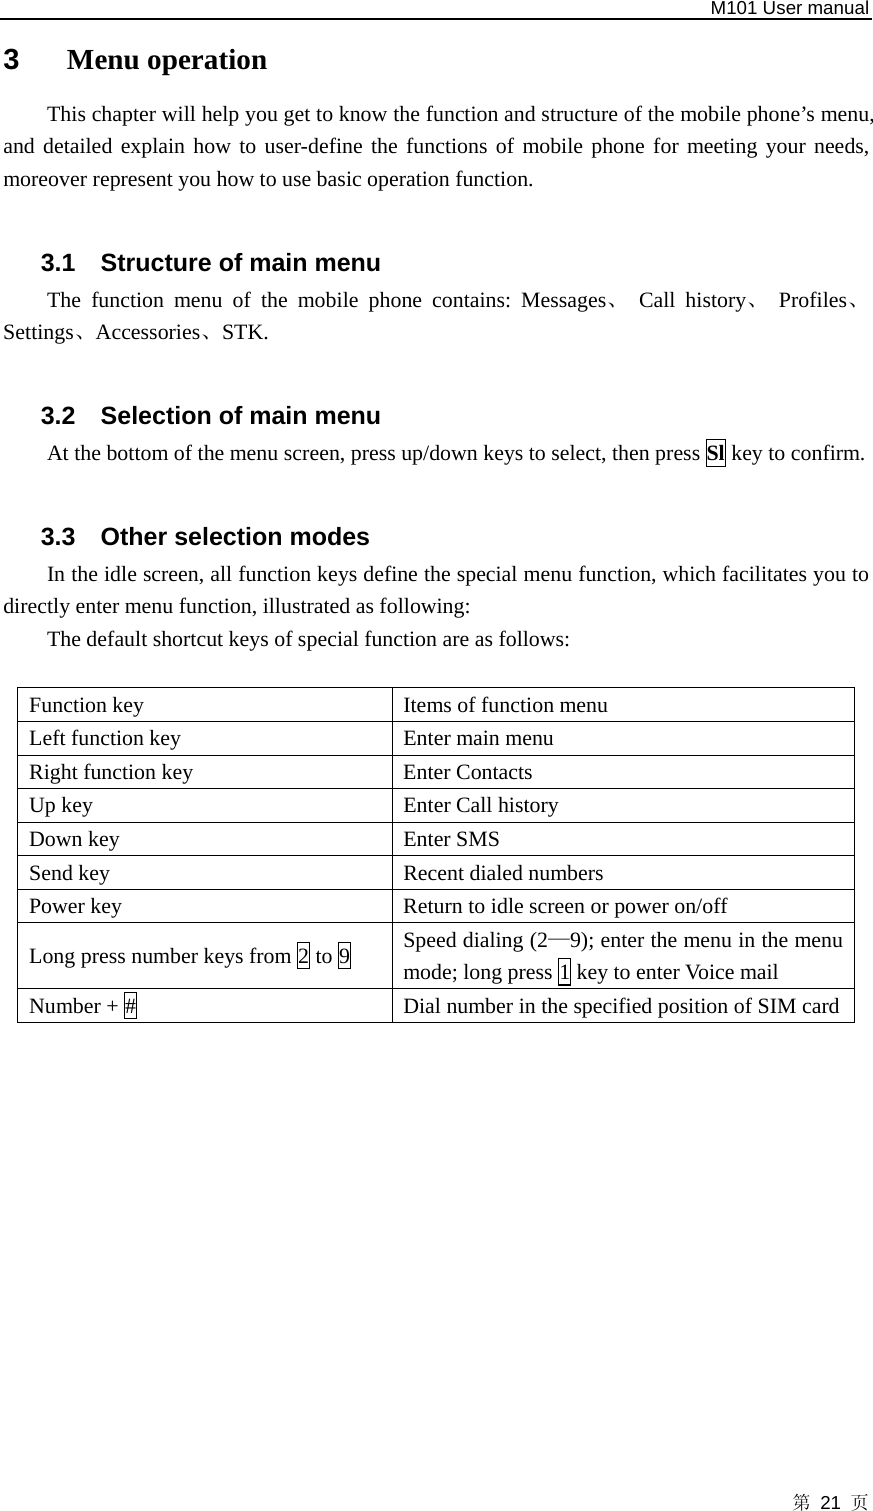   M101 User manual 第 21 页 3  Menu operation This chapter will help you get to know the function and structure of the mobile phone’s menu, and detailed explain how to user-define the functions of mobile phone for meeting your needs, moreover represent you how to use basic operation function.  3.1  Structure of main menu The function menu of the mobile phone contains: Messages、 Call history、 Profiles、Settings、Accessories、STK.  3.2  Selection of main menu At the bottom of the menu screen, press up/down keys to select, then press Sl key to confirm.  3.3  Other selection modes In the idle screen, all function keys define the special menu function, which facilitates you to directly enter menu function, illustrated as following:   The default shortcut keys of special function are as follows:  Function key  Items of function menu   Left function key  Enter main menu Right function key  Enter Contacts Up key  Enter Call history Down key  Enter SMS Send key  Recent dialed numbers Power key  Return to idle screen or power on/off Long press number keys from 2 to 9    Speed dialing (2—9); enter the menu in the menu mode; long press 1 key to enter Voice mail Number + #  Dial number in the specified position of SIM card  